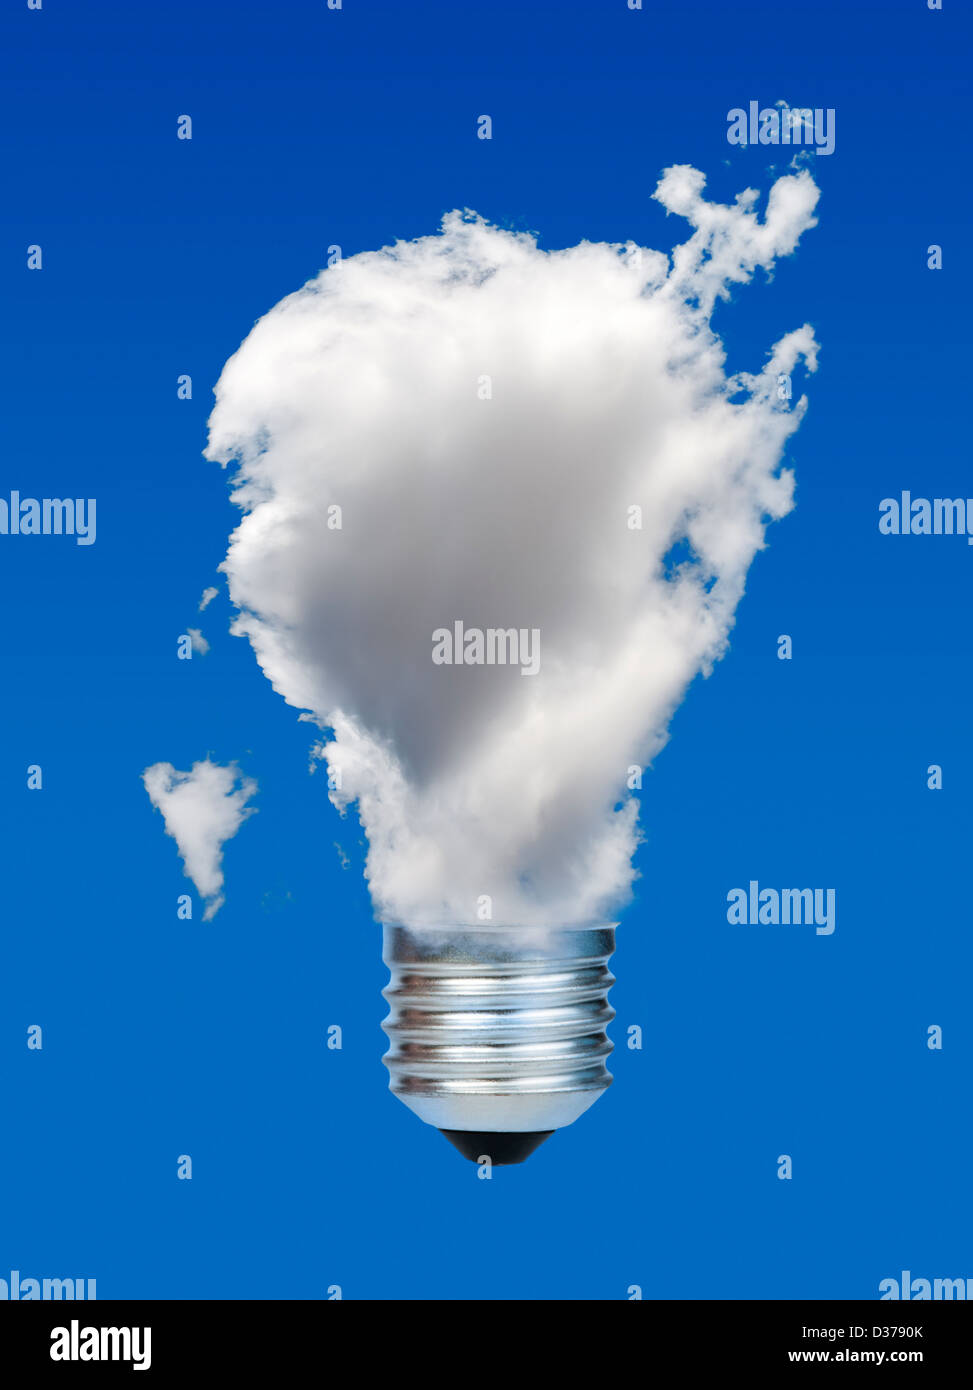 Lamp made of clouds. Ecology conception. Blue sky. Stock Photo